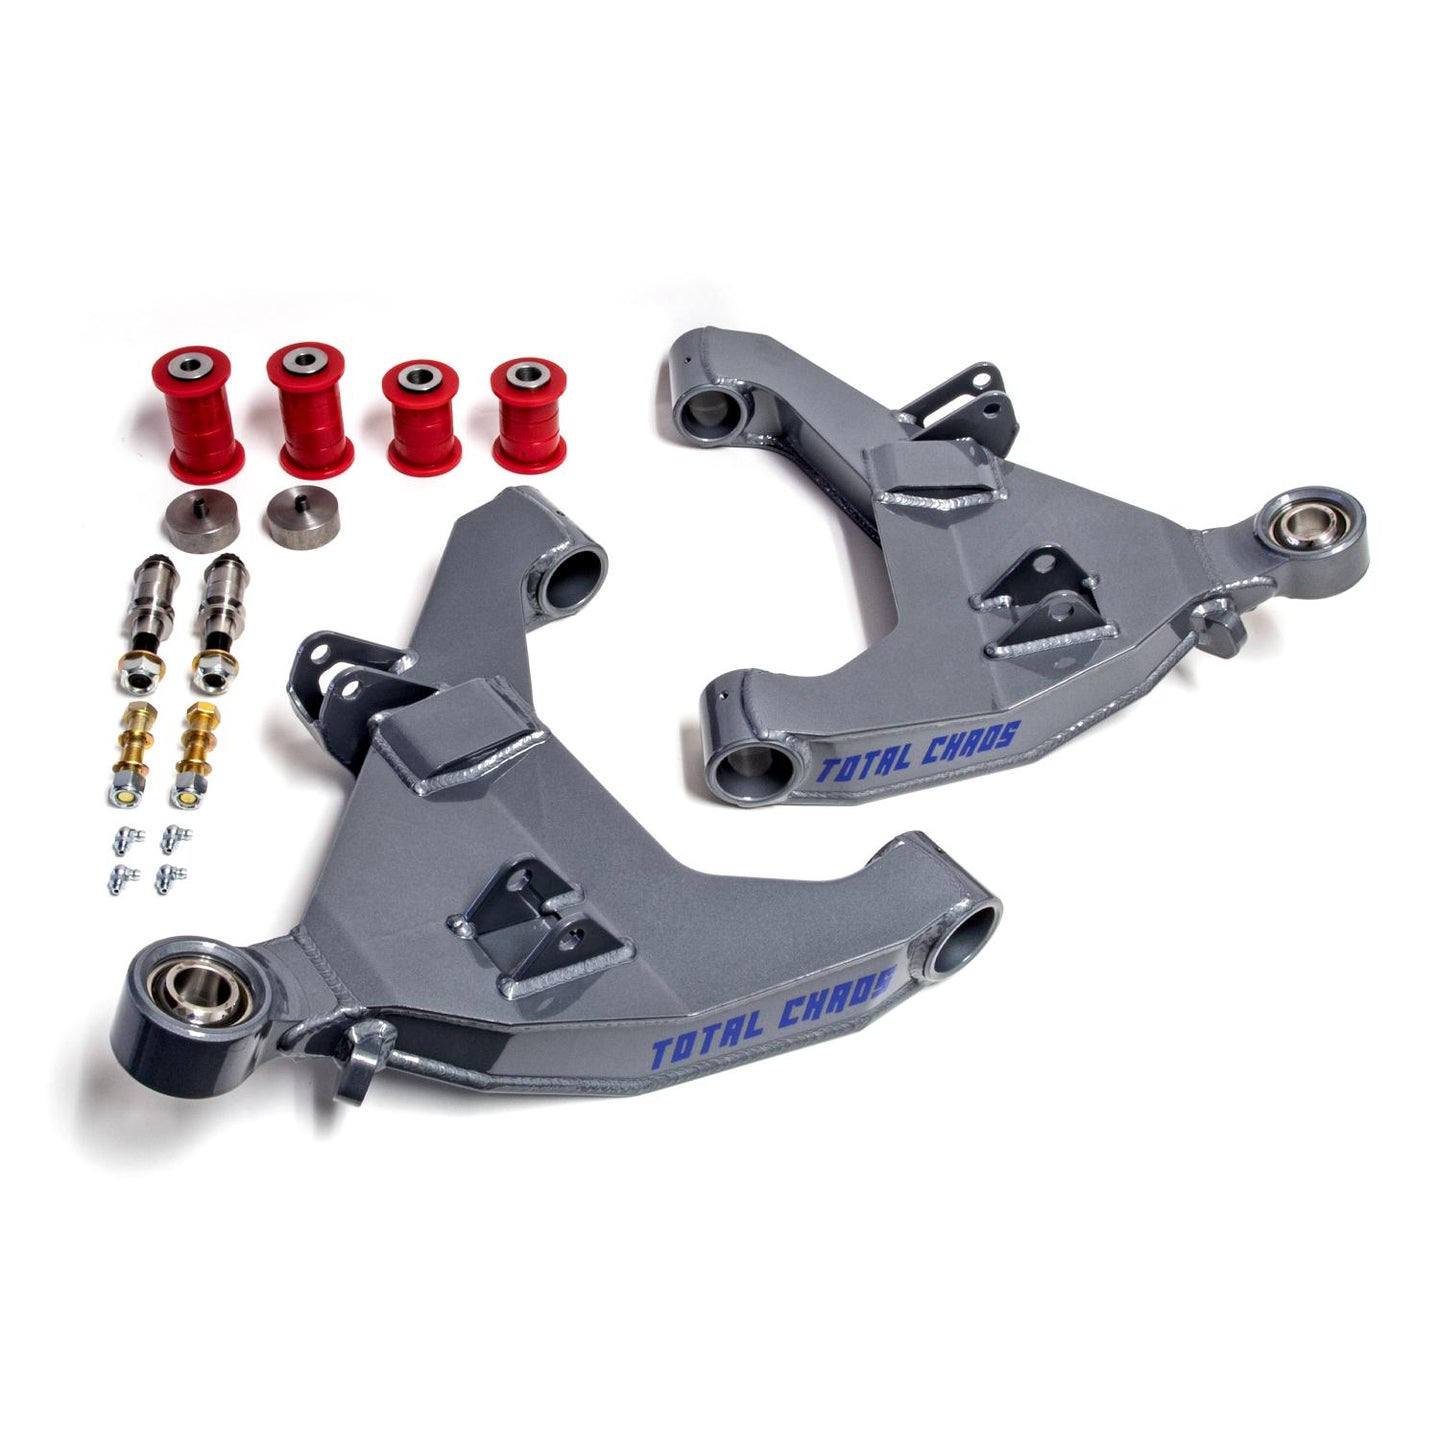 Total Chaos Fabrication- Expedition Series Lower Control Arms (3rd Gen Toyota Tacoma 2016-2021)